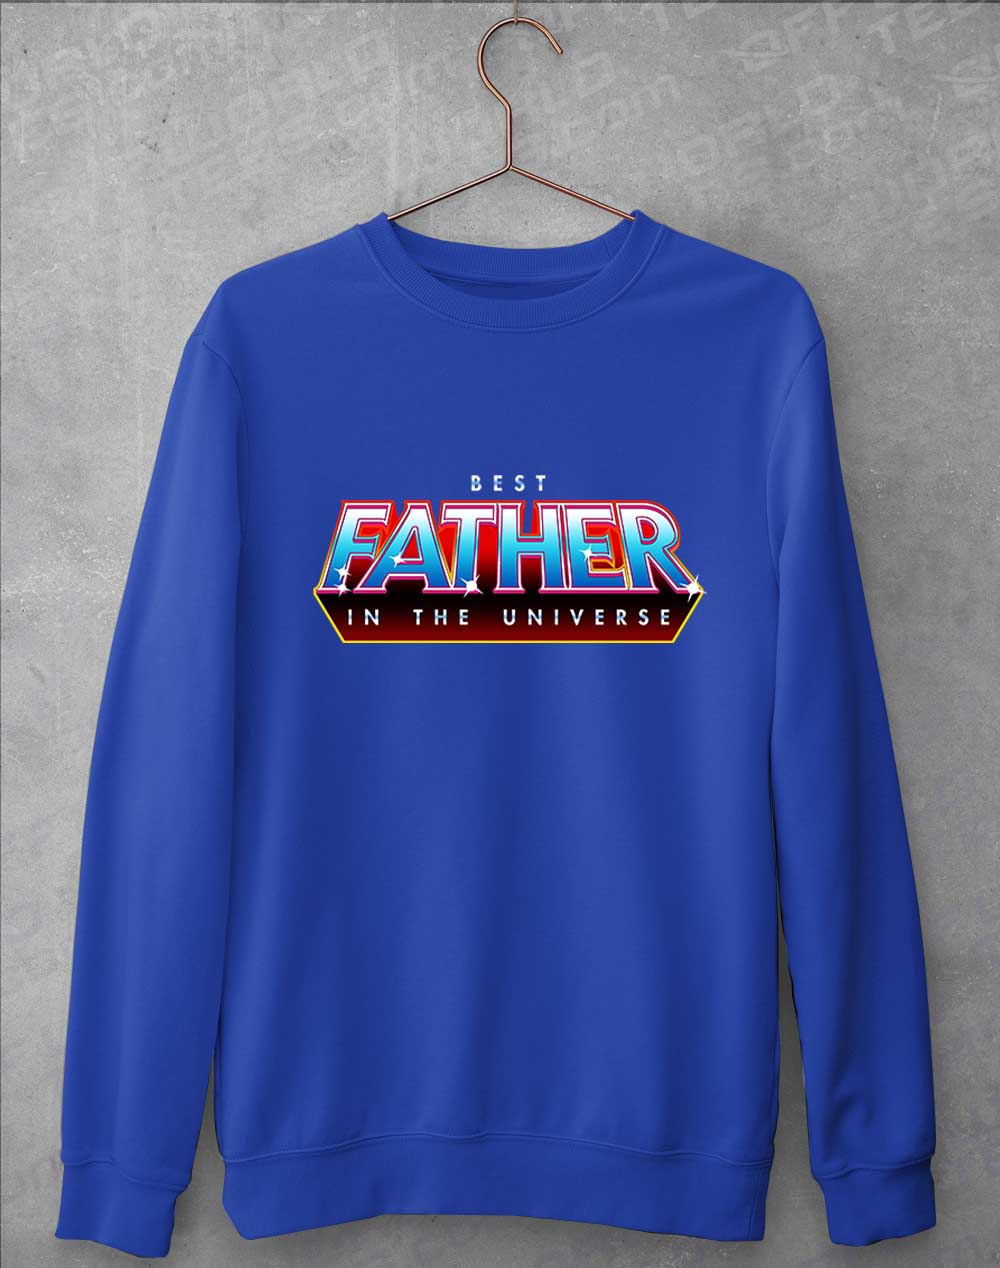 Royal Blue - Best Father in the Universe Sweatshirt